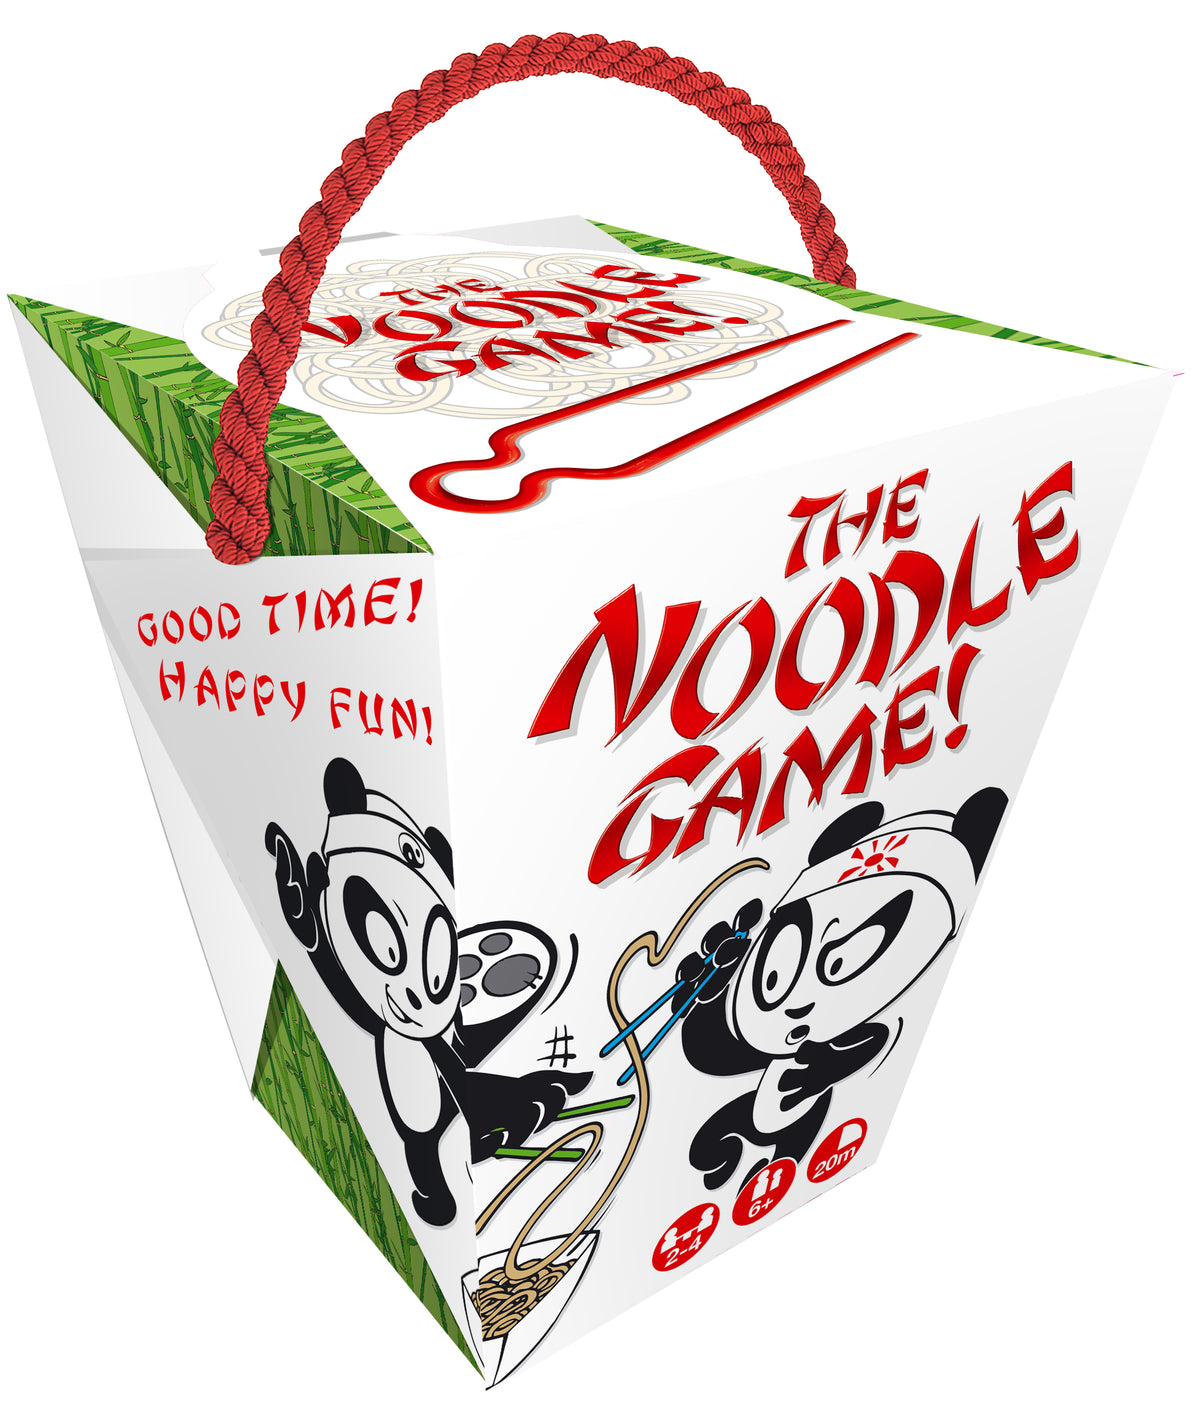 THE NOODLE GAME